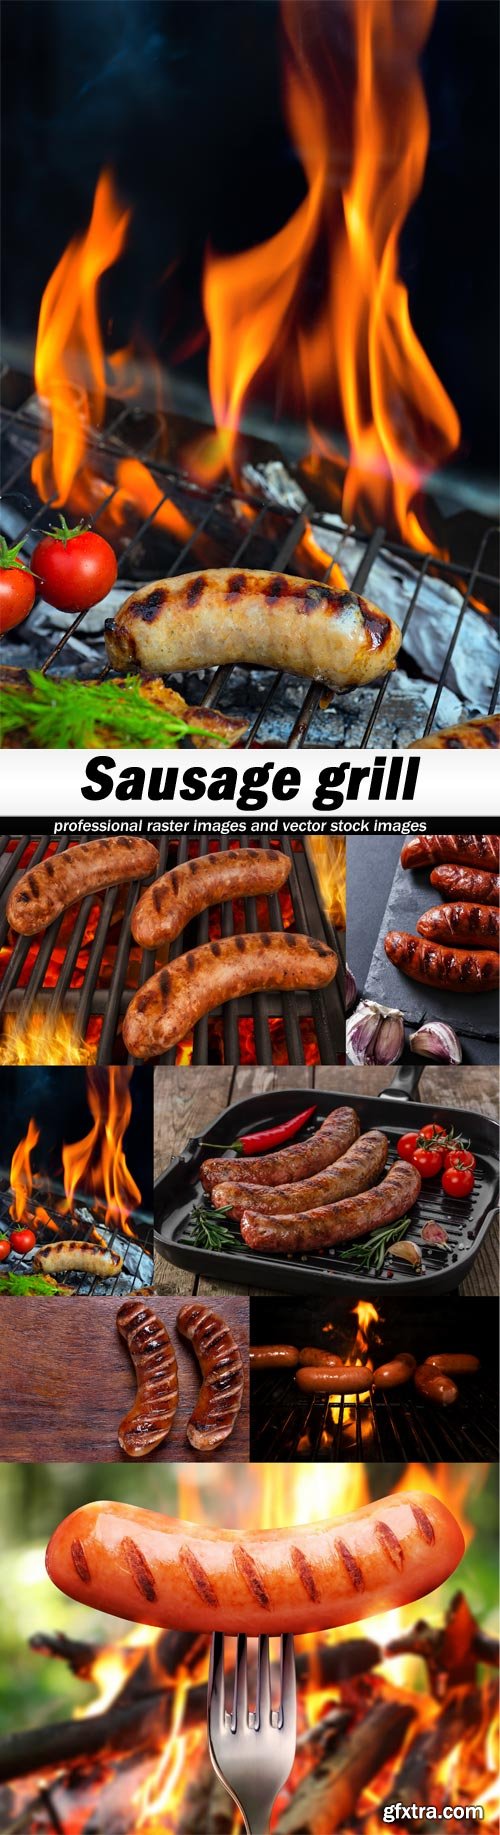 Sausage grill-7xJPEGs